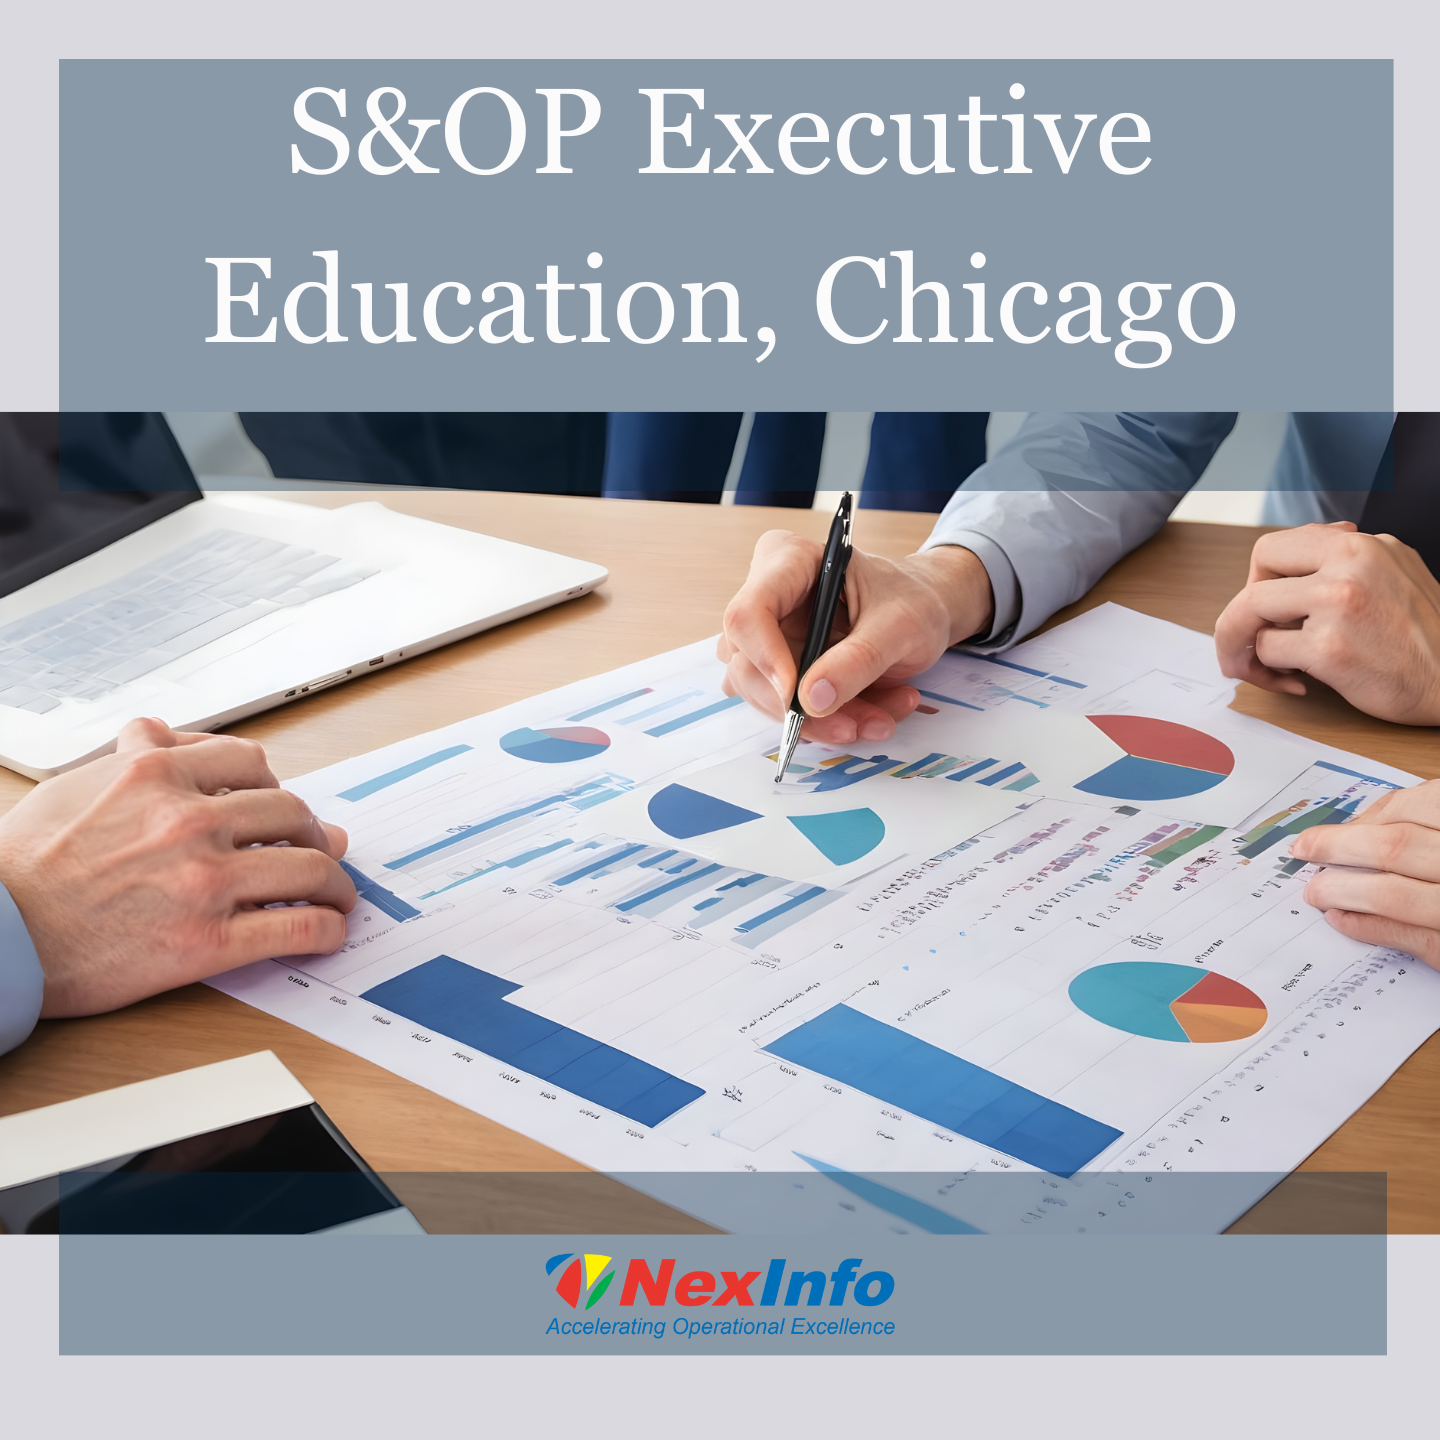 S&OP Executive Education, Chicago